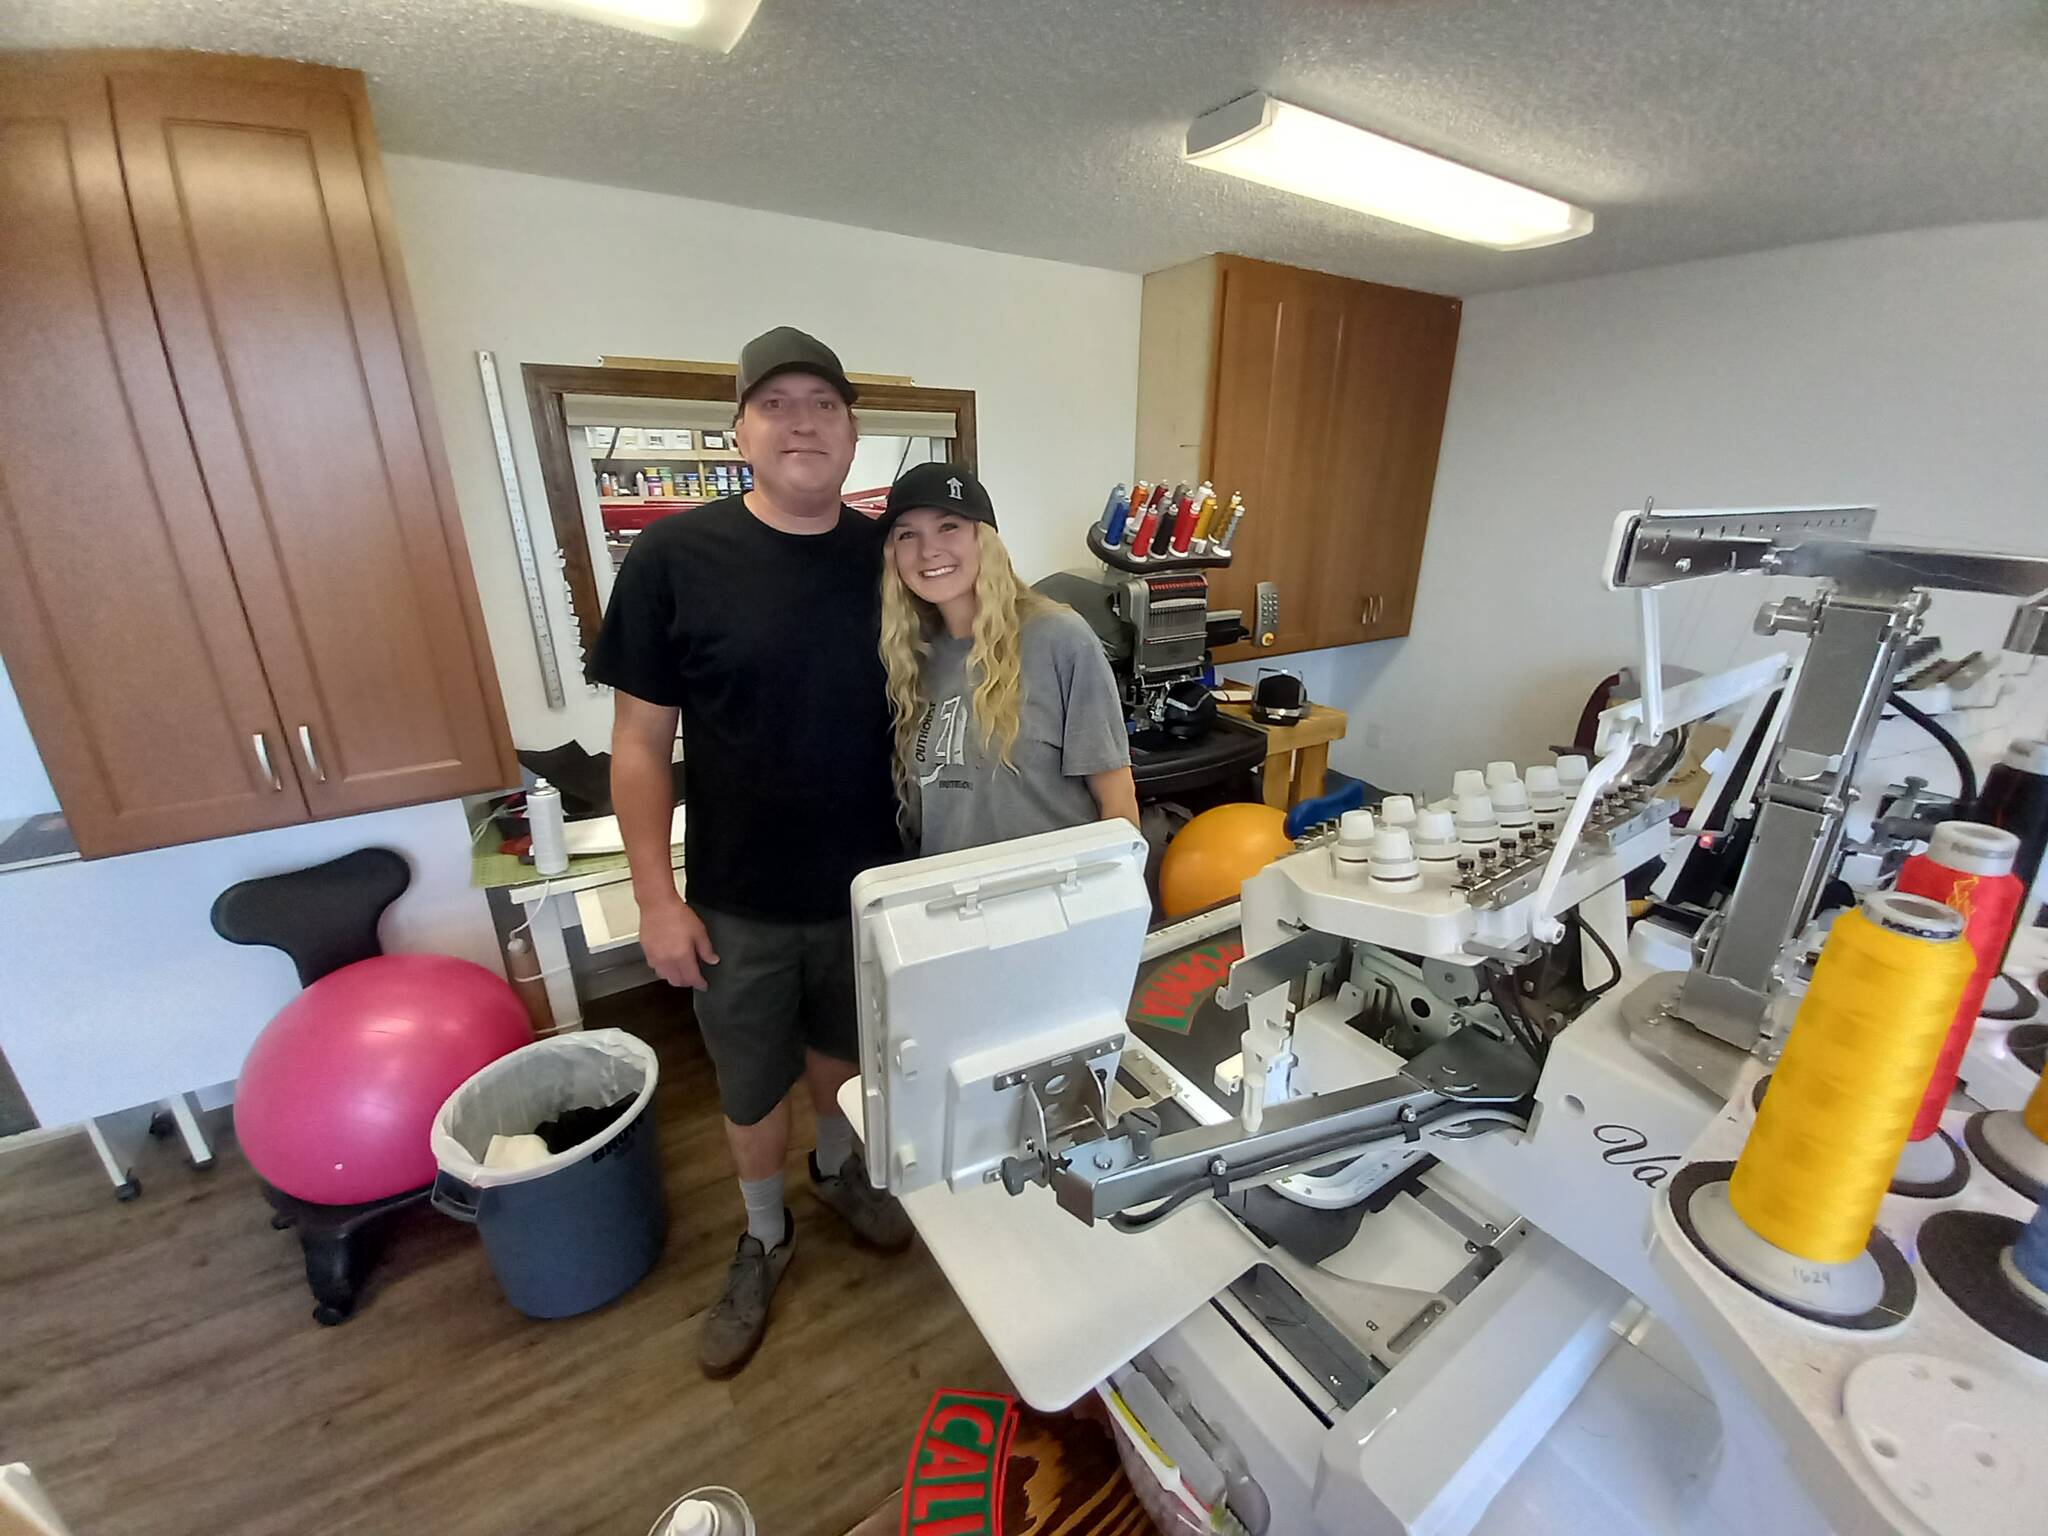 Jon Williams and his daughter, Courtney, run the highly successful family business, The Outhouse, the go-to-place for silk screening and embroidery in the area. Photo by Robert Whale, Auburn Reporter.